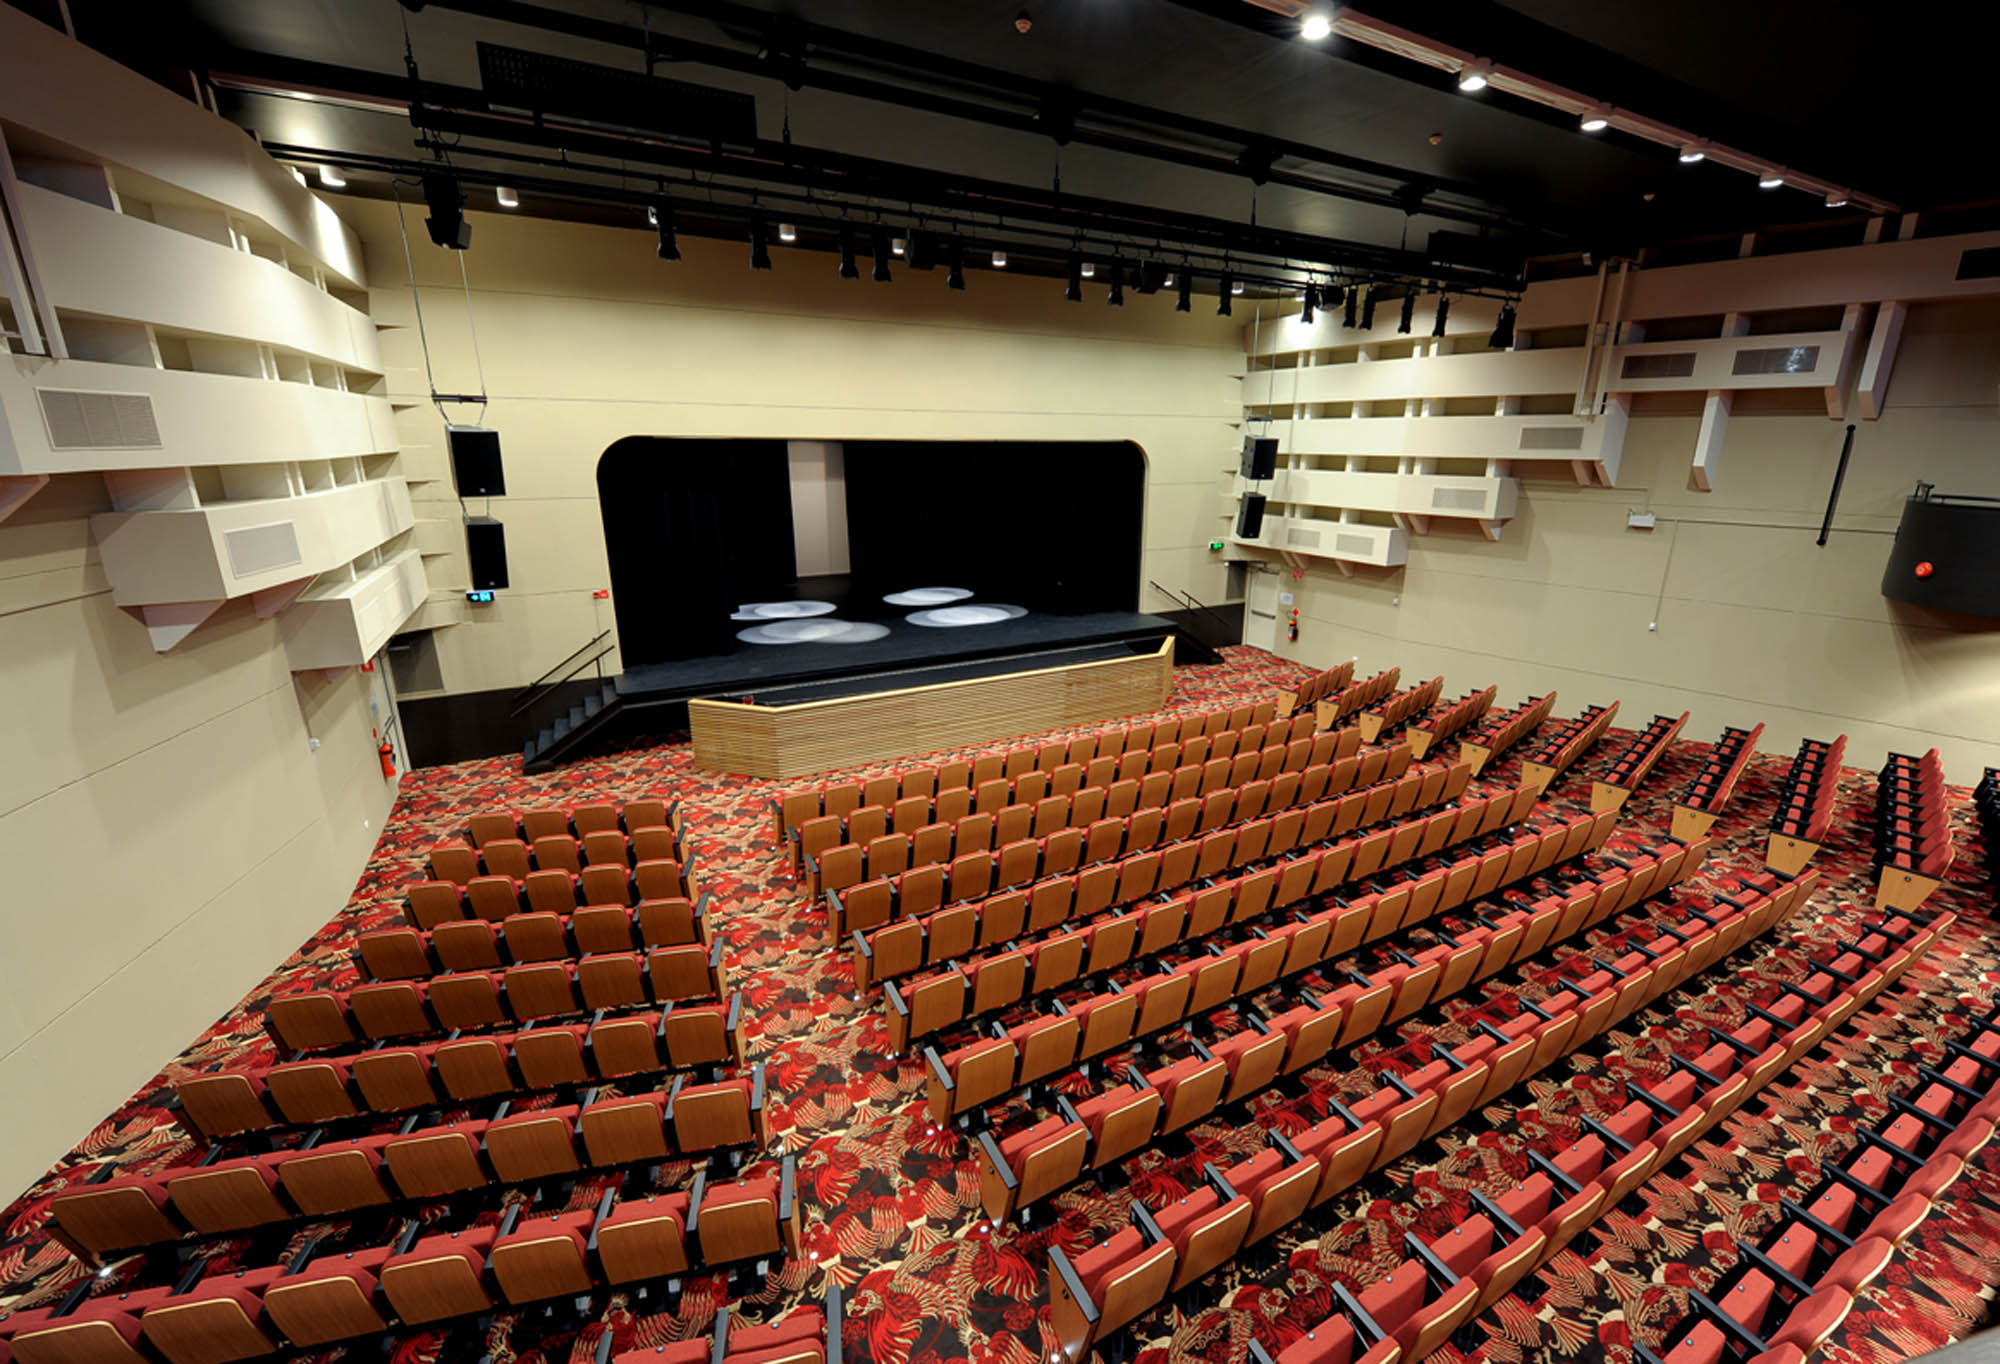 griffith duncan theatre education interior nsw newcastle university birds eye view stage tier seating